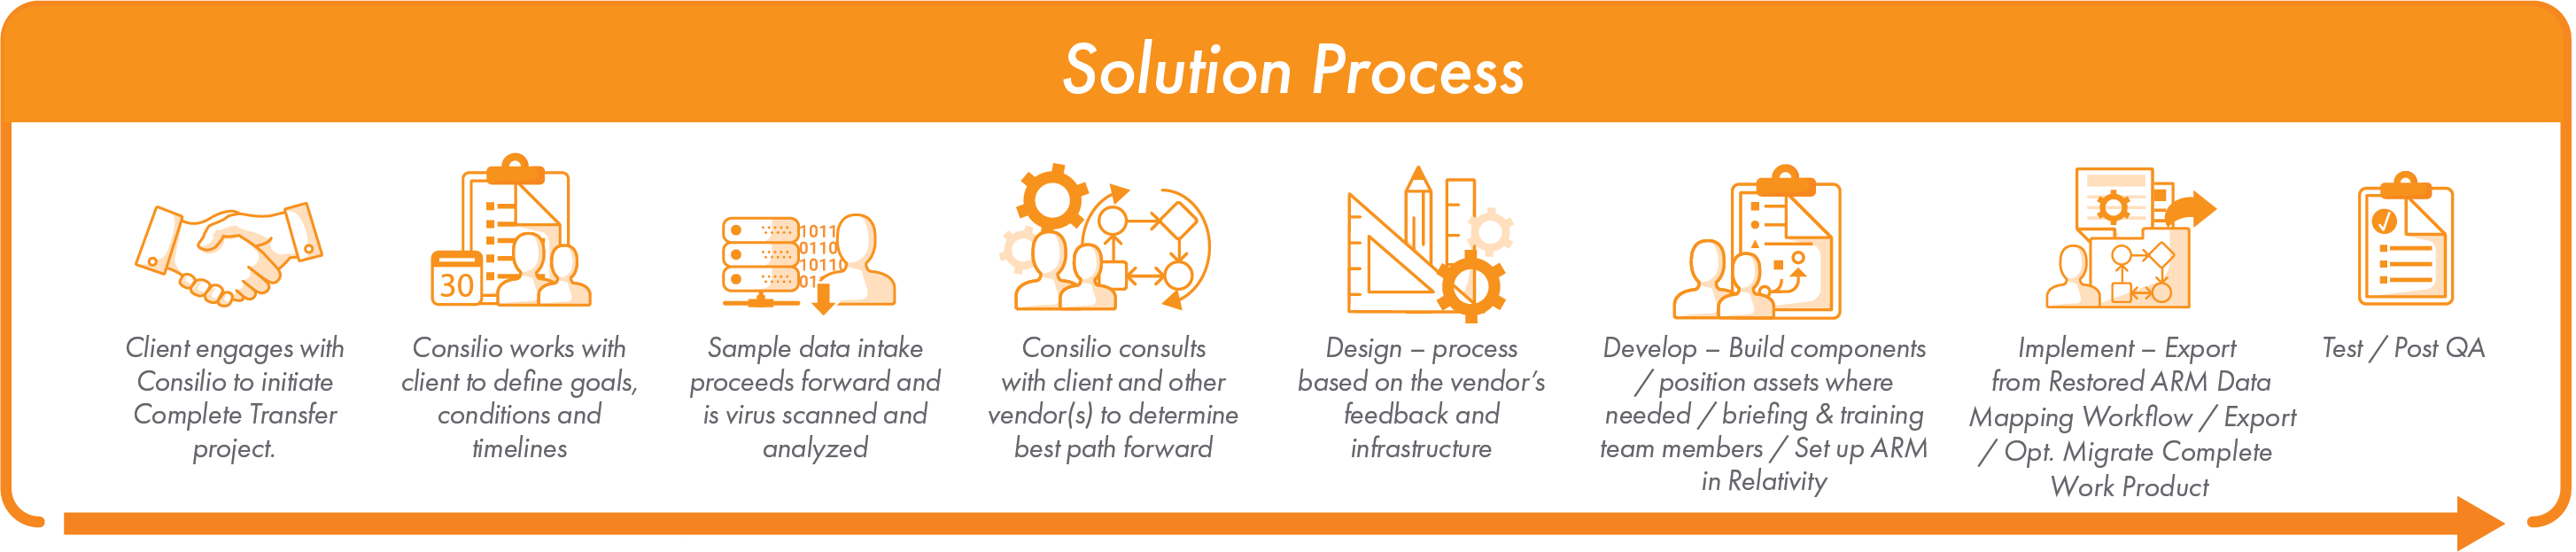 Solution Process for Complete Transfer